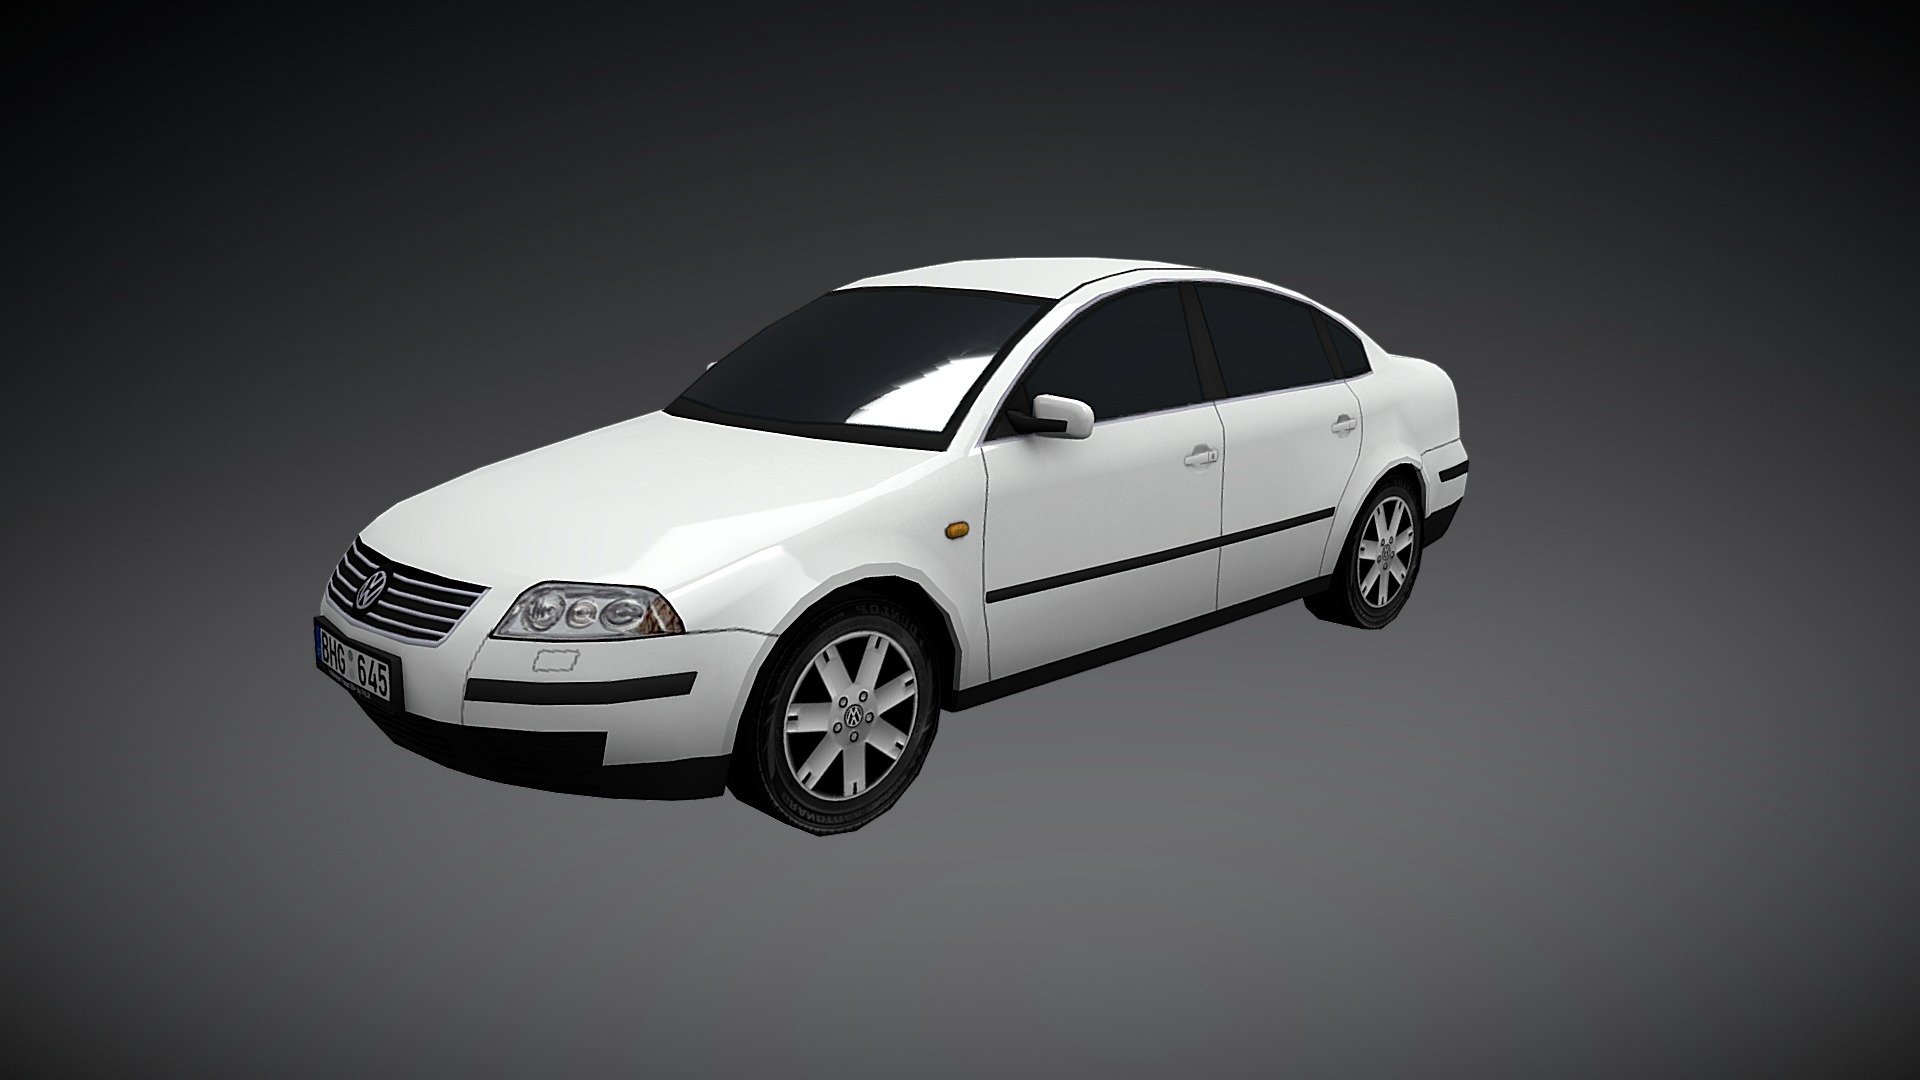 Updated v2   /2019-07-19

Volkswagen Passat B5.5 (B5 facelift); 
Made for Cities: Skylines; 
2220 triangles; 
Lithuanian number plates 3d model